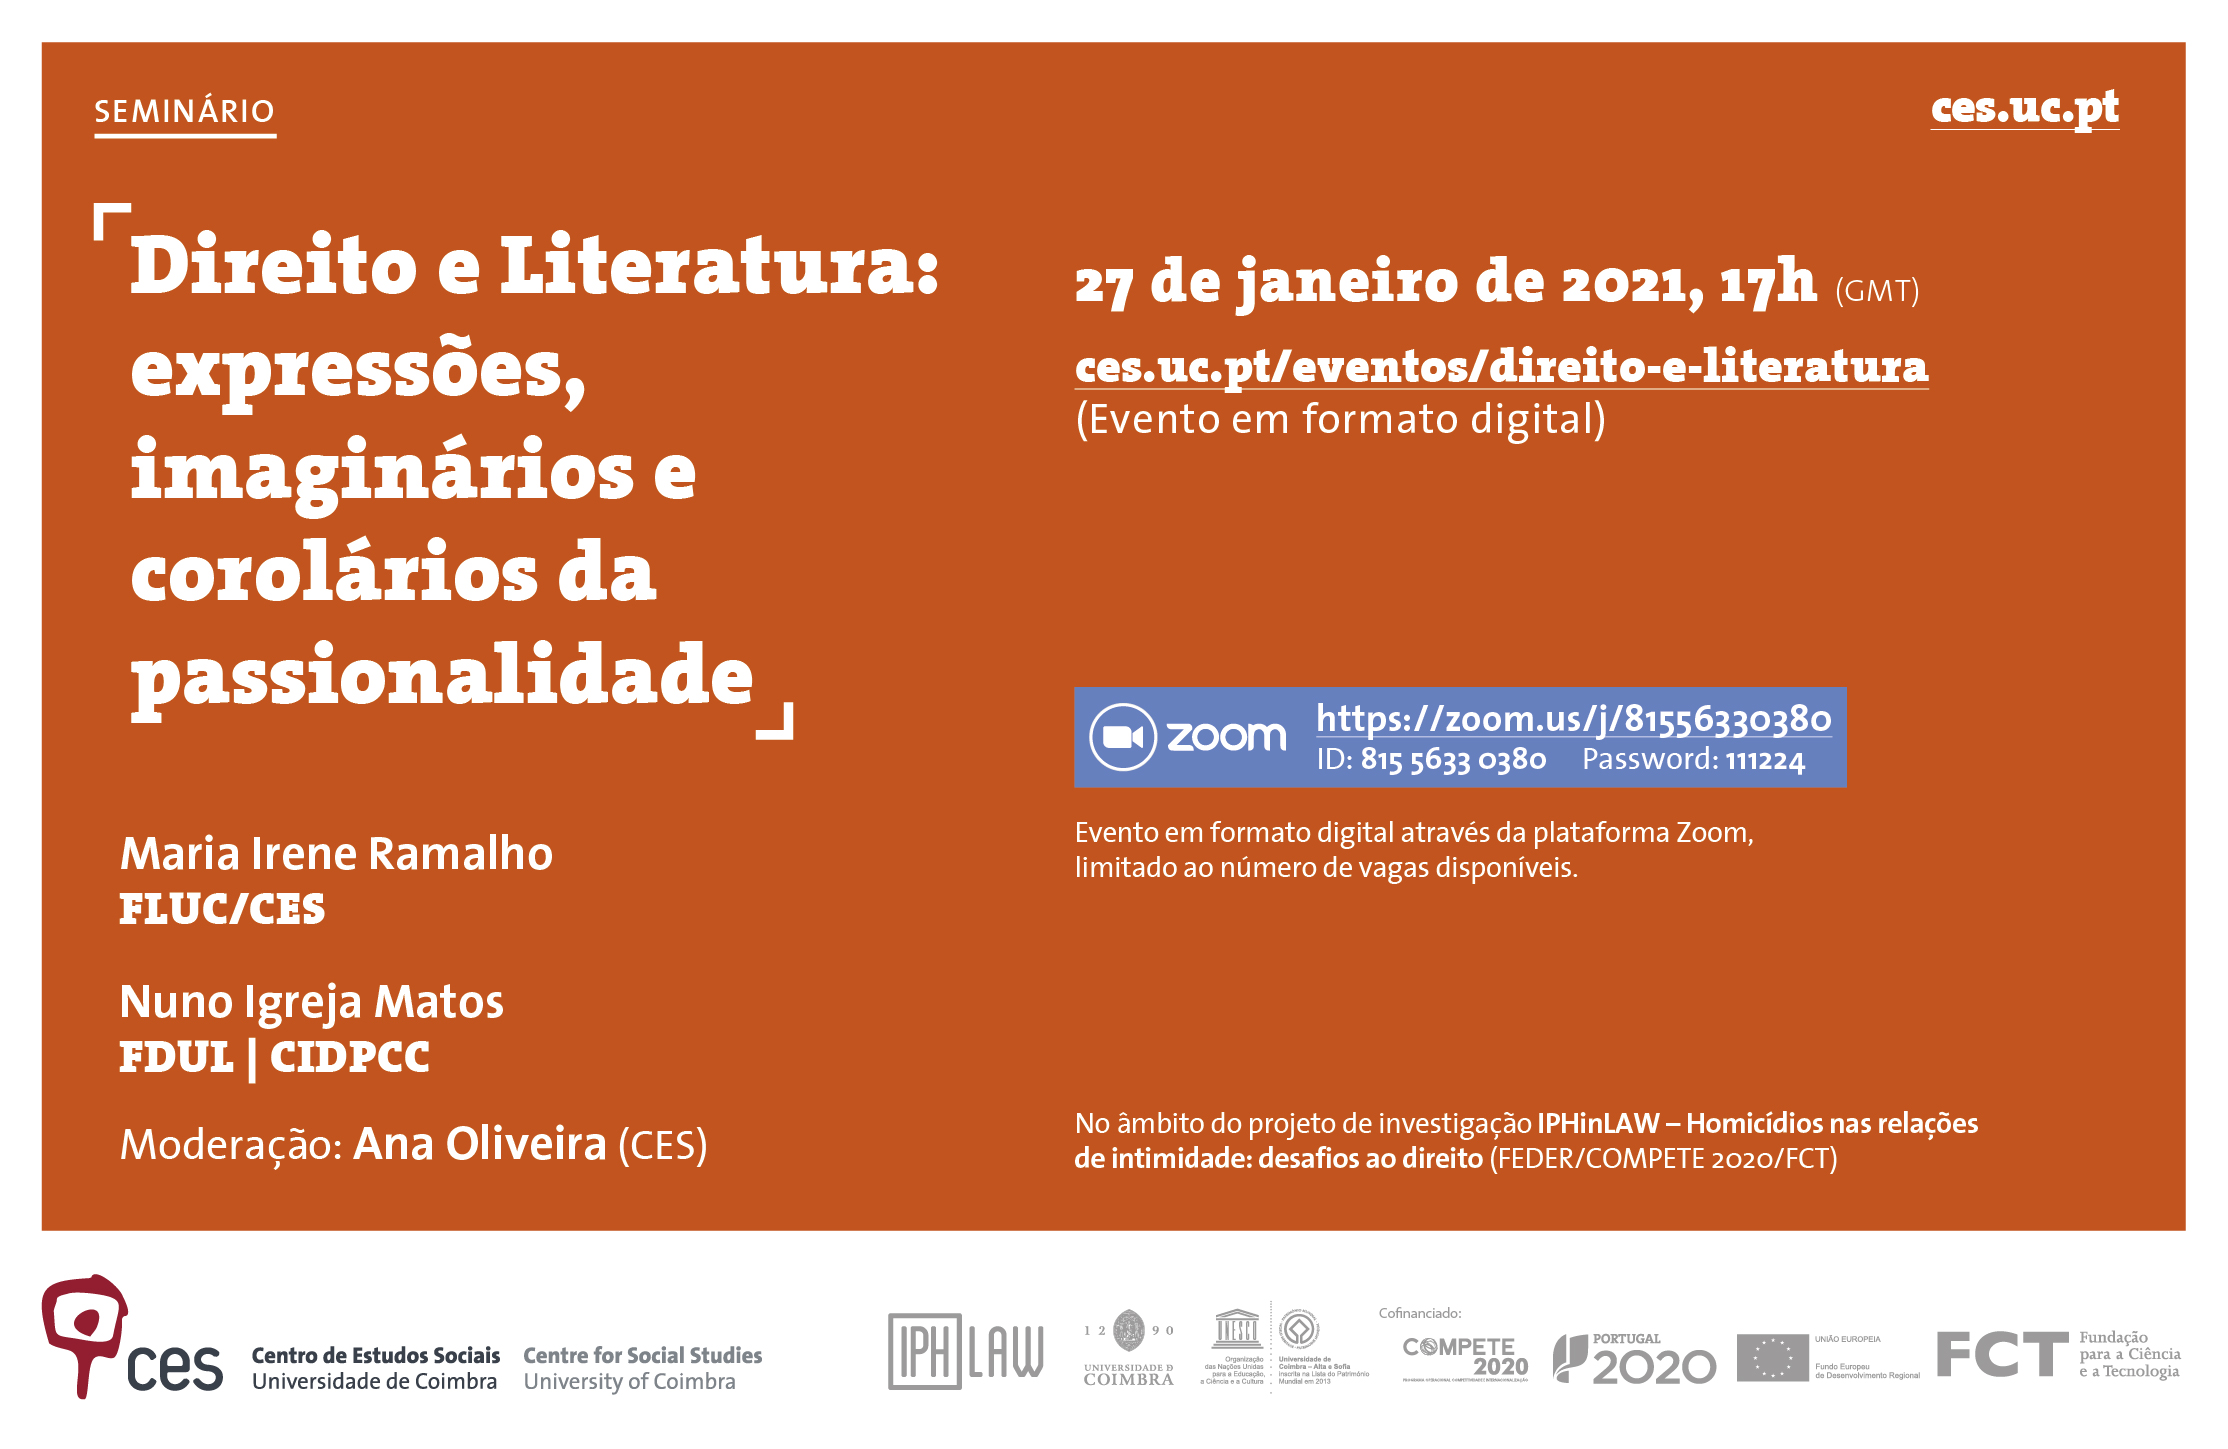 Law and Literature: expressions, imaginary and corollaries of passion<span id="edit_31756"><script>$(function() { $('#edit_31756').load( "/myces/user/editobj.php?tipo=evento&id=31756" ); });</script></span>